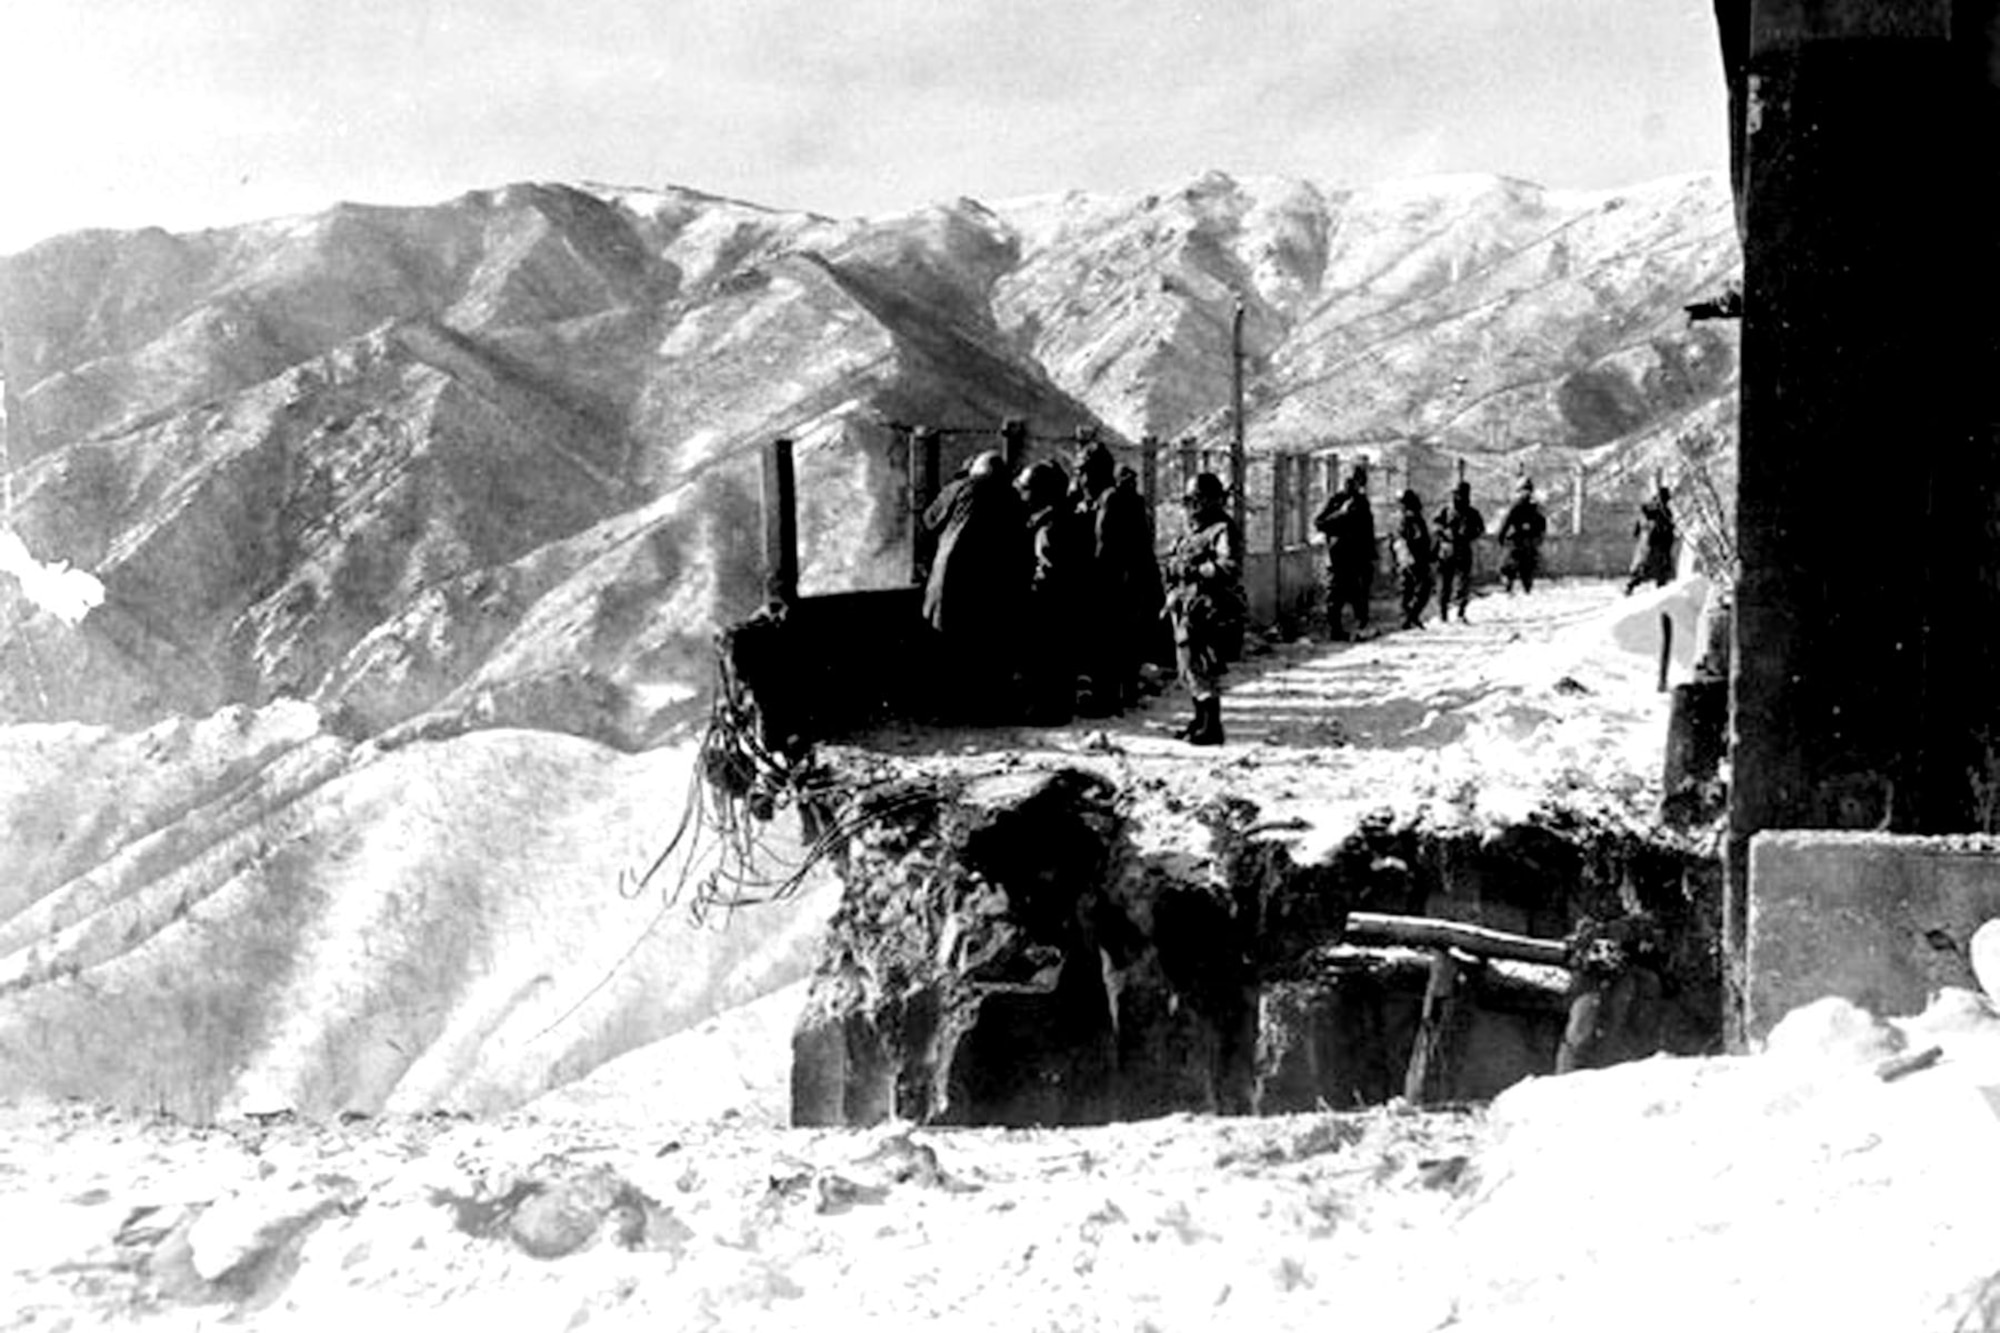 This blown bridge blocked the only way out for U.S. forces withdrawing from Chosin Reservoir. Air Force C-119s dropped portable bridge sections to span the chasm, allowing men and equipment to reach safety. (U.S. Air Force photo)